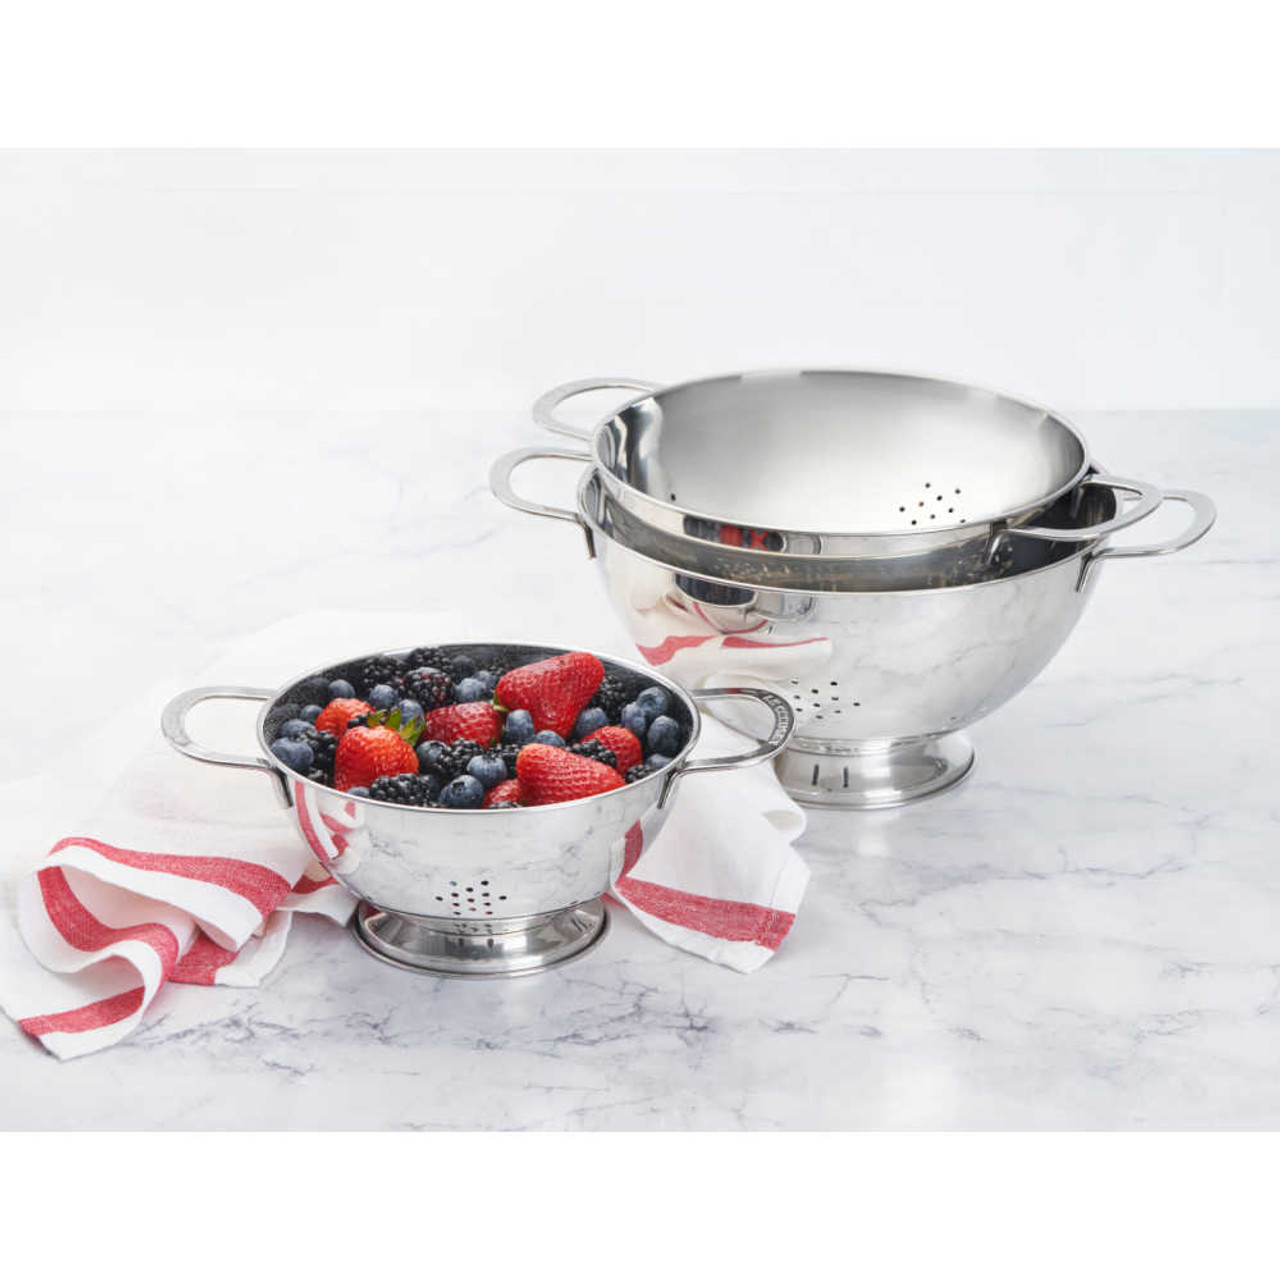 https://cdn11.bigcommerce.com/s-hccytny0od/images/stencil/1280x1280/products/5235/22576/Le_Creuset_Stainless_Steel_Colander_Set__76261.1674077996.jpg?c=2?imbypass=on